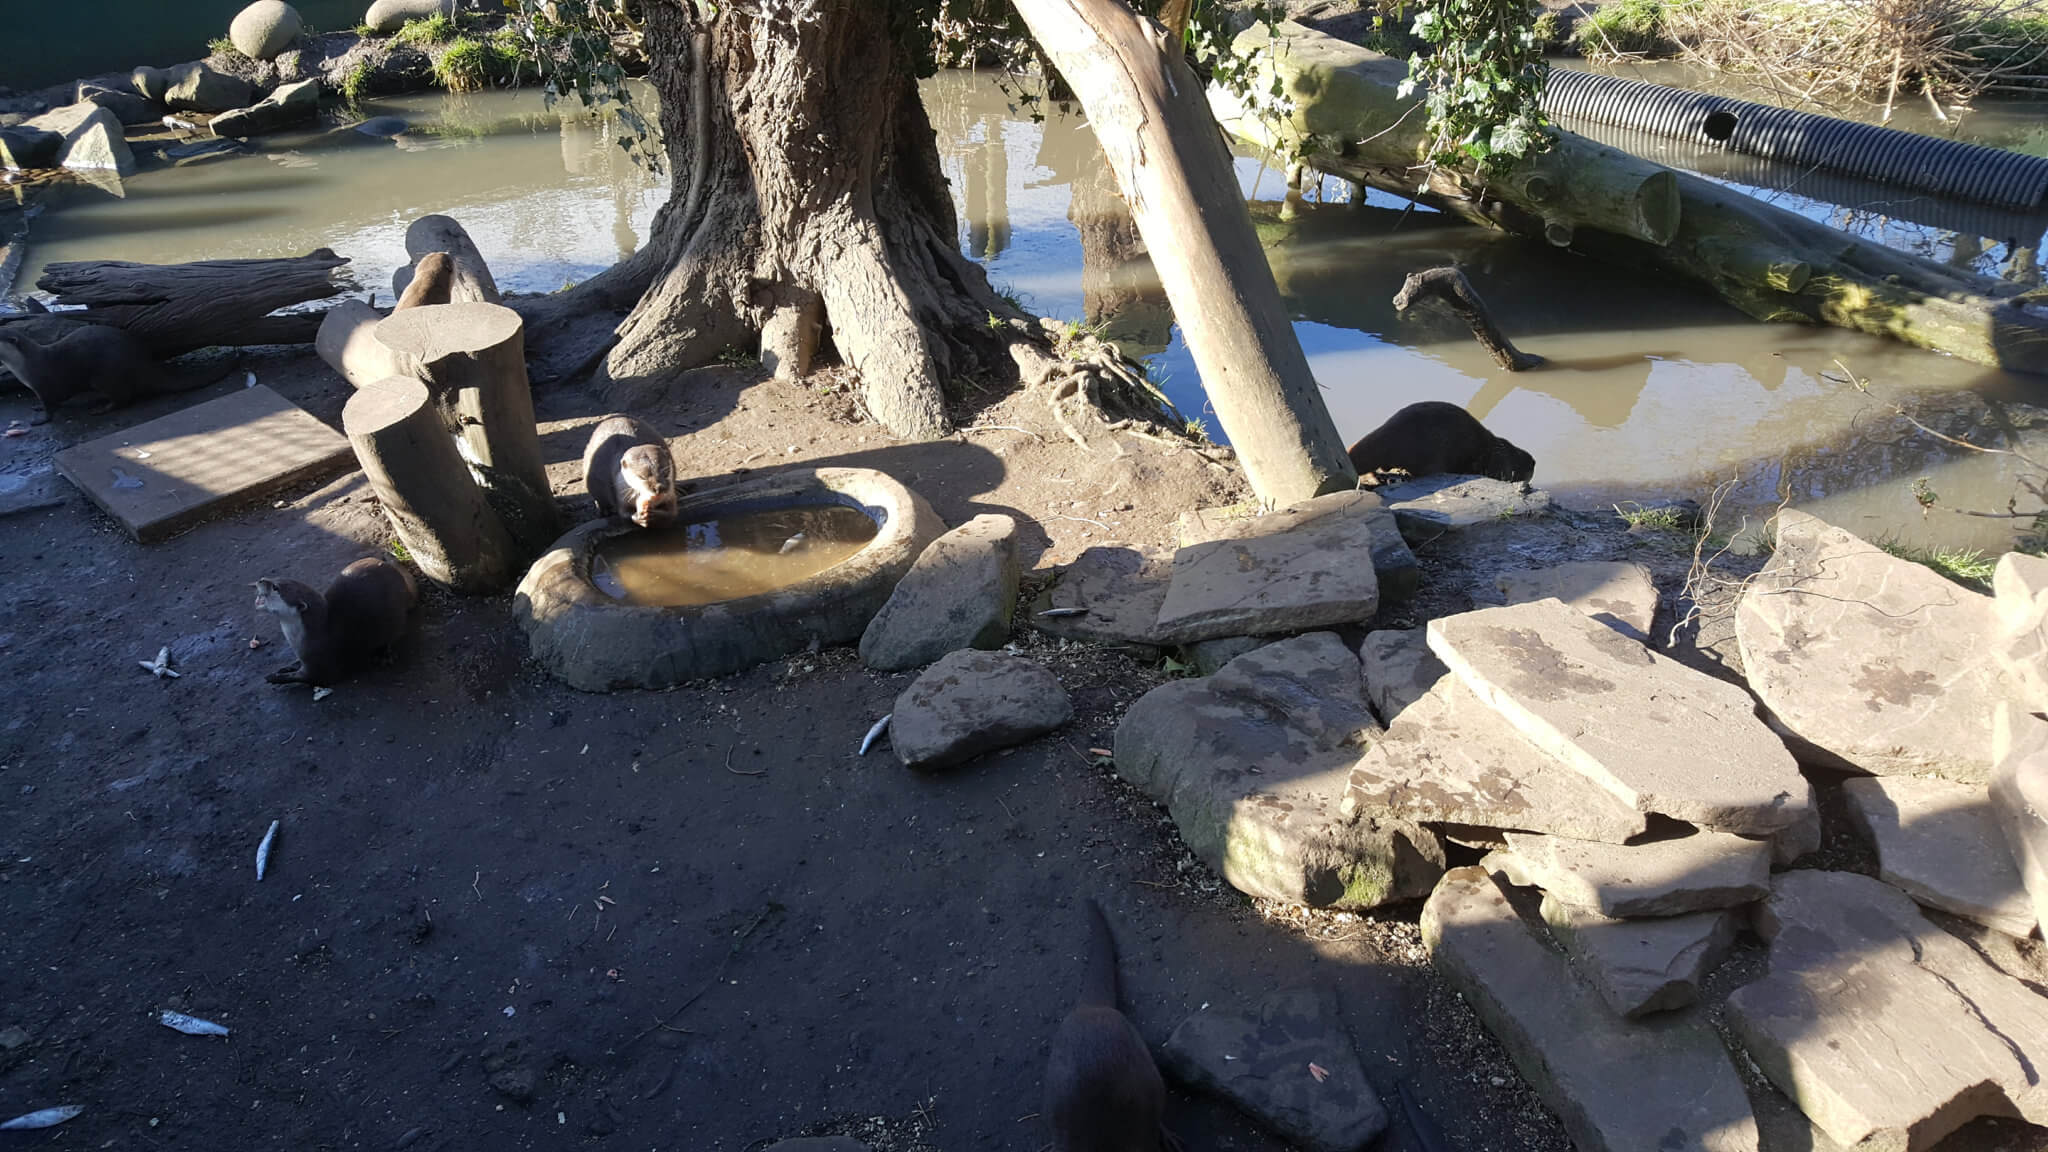 Otters in their enclosure different angle